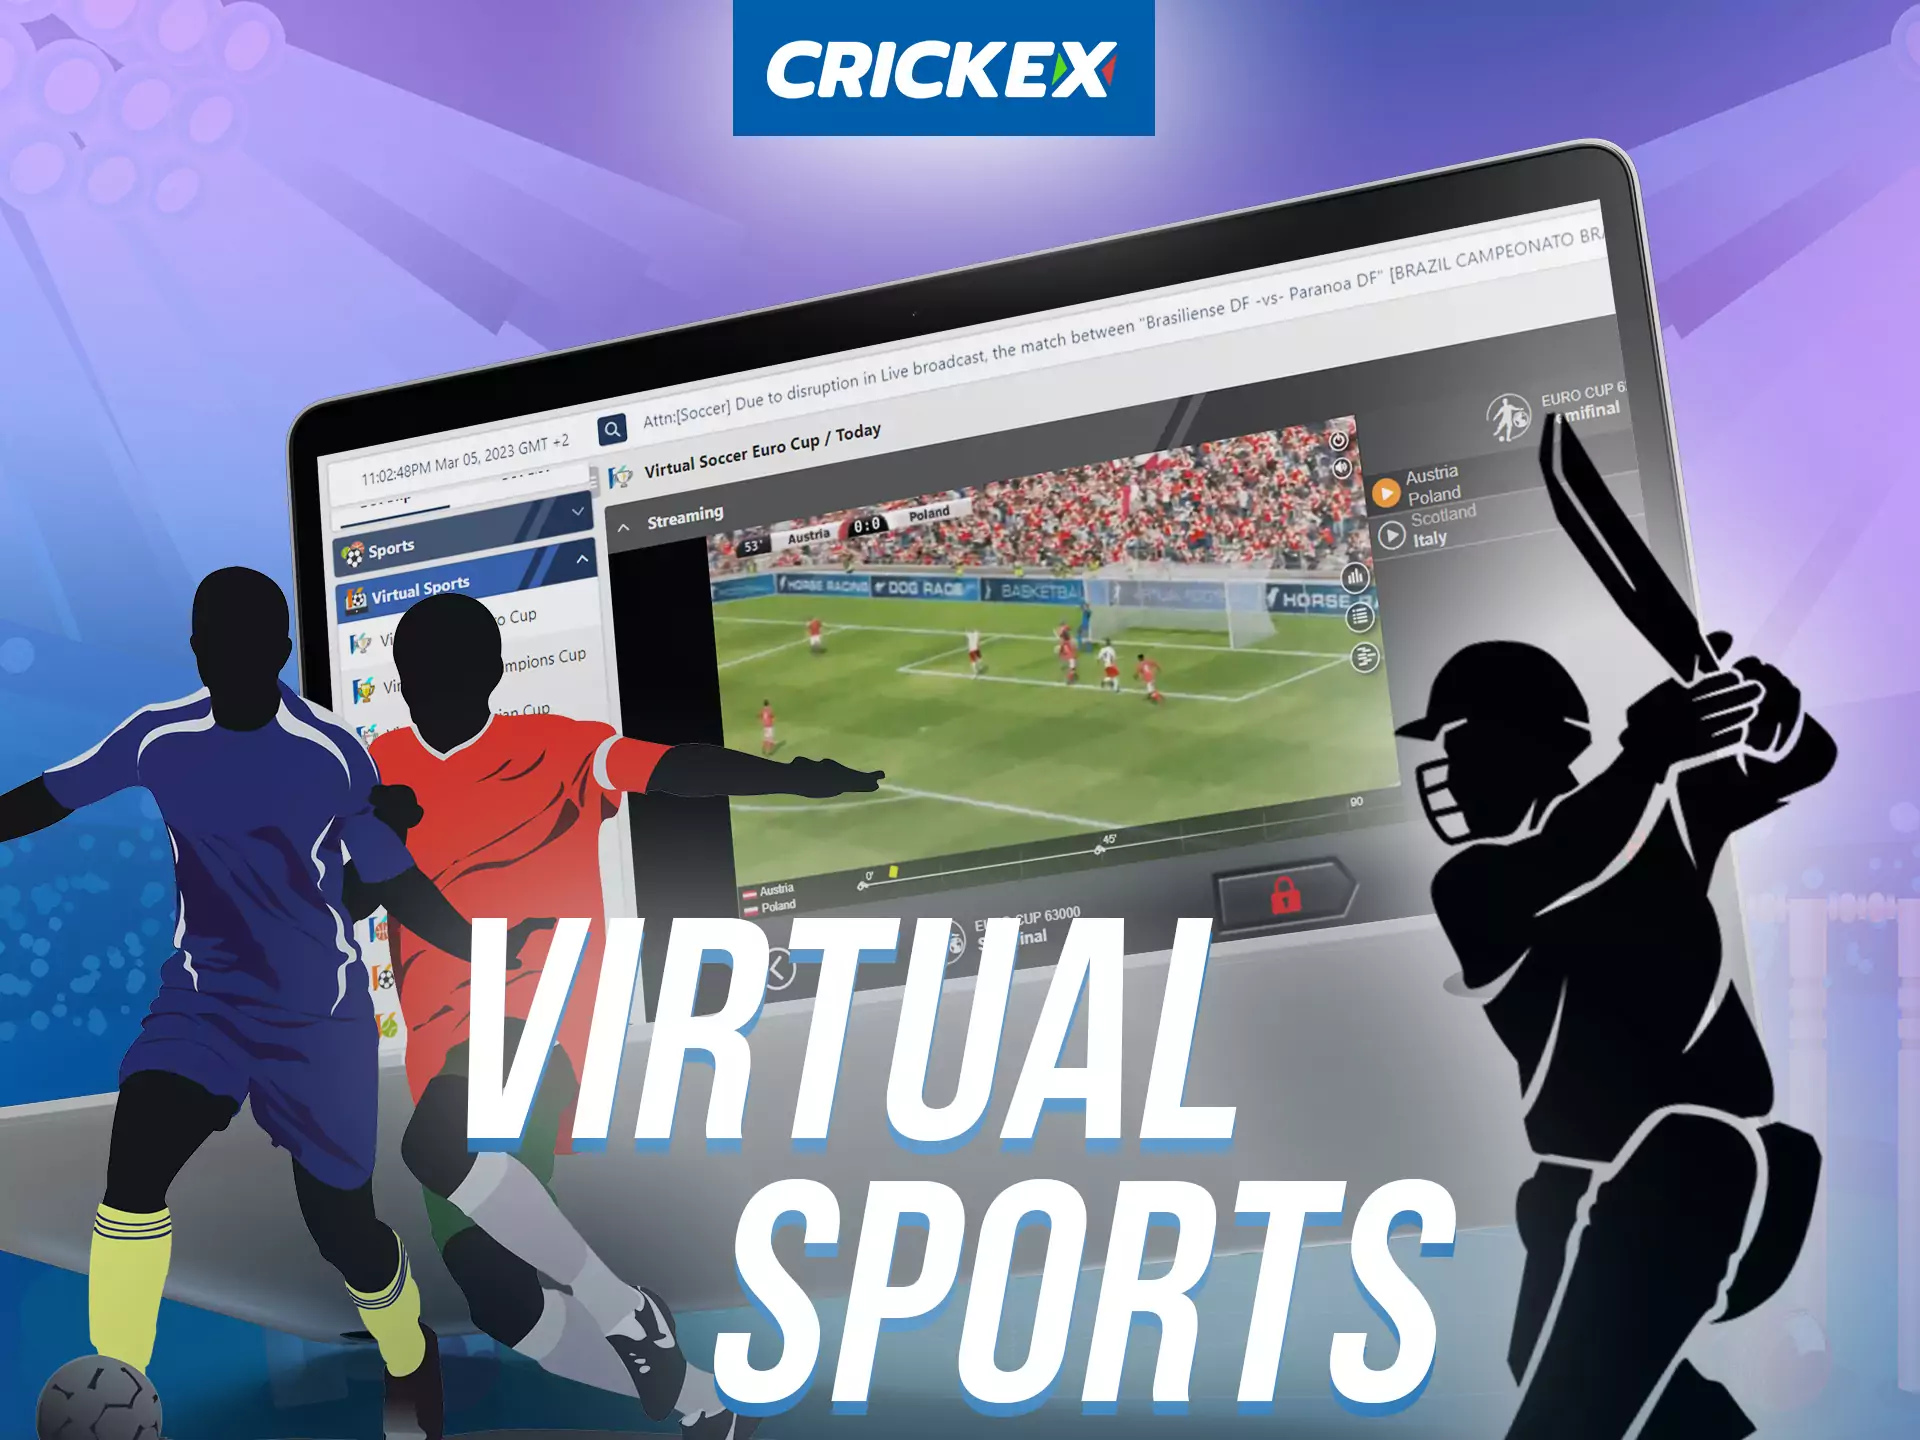 At Crickex, place bets on virtual sports.